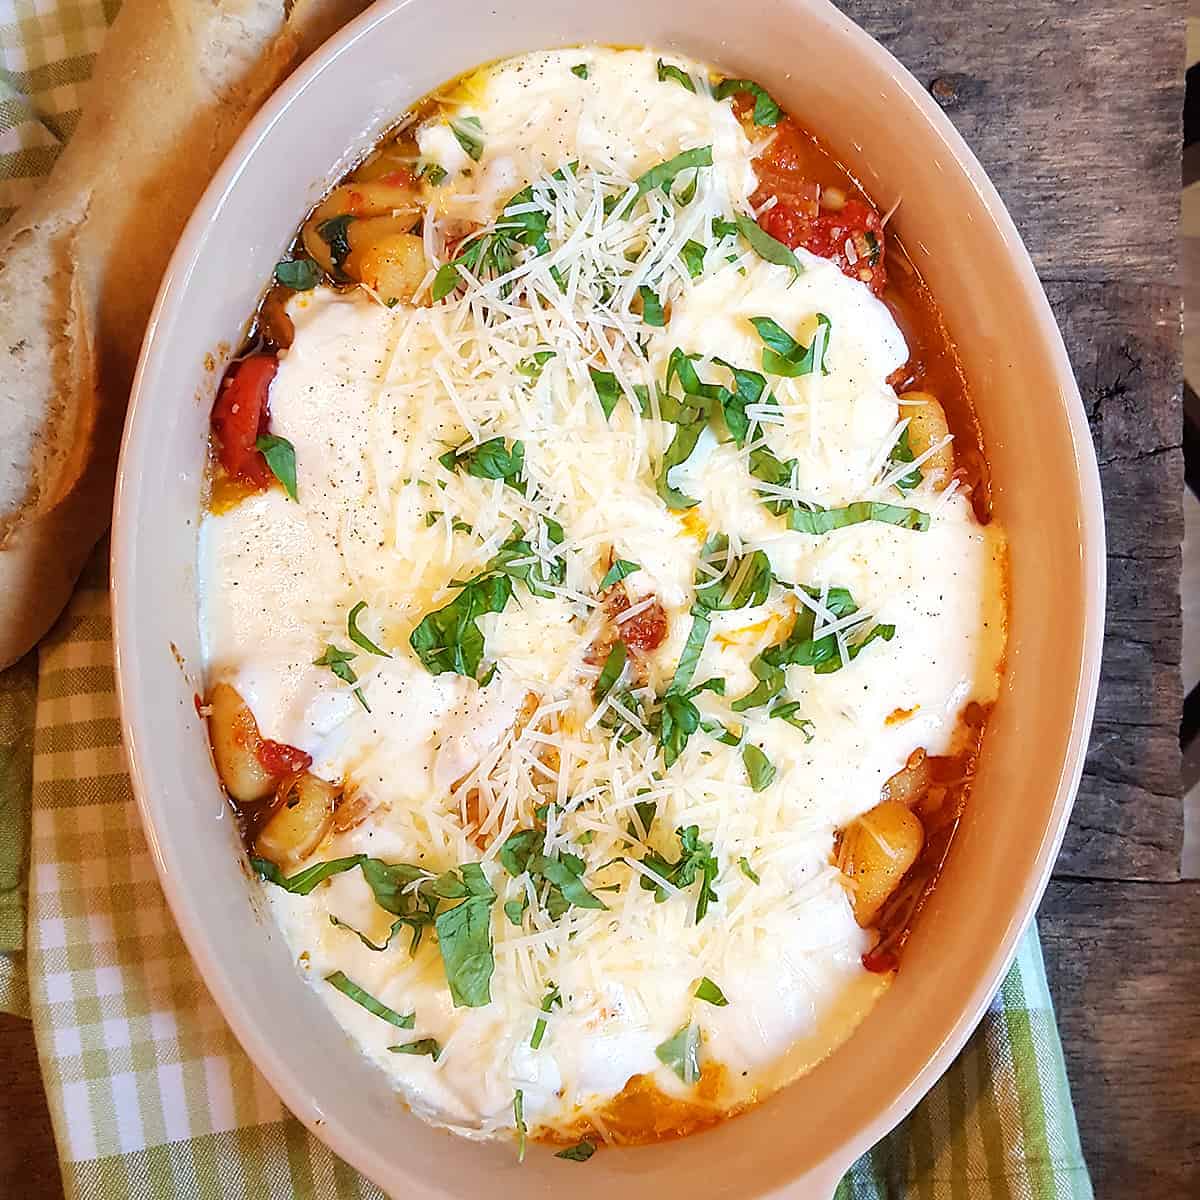 Gnocchi with Tomato Sauce - soft, pillowy gnocchi in a rich tomato sauce, topped with gooey mozzarella cheese. Kids love it! https://www.lanascooking.com/gnocchi-with-tomato-sauce/